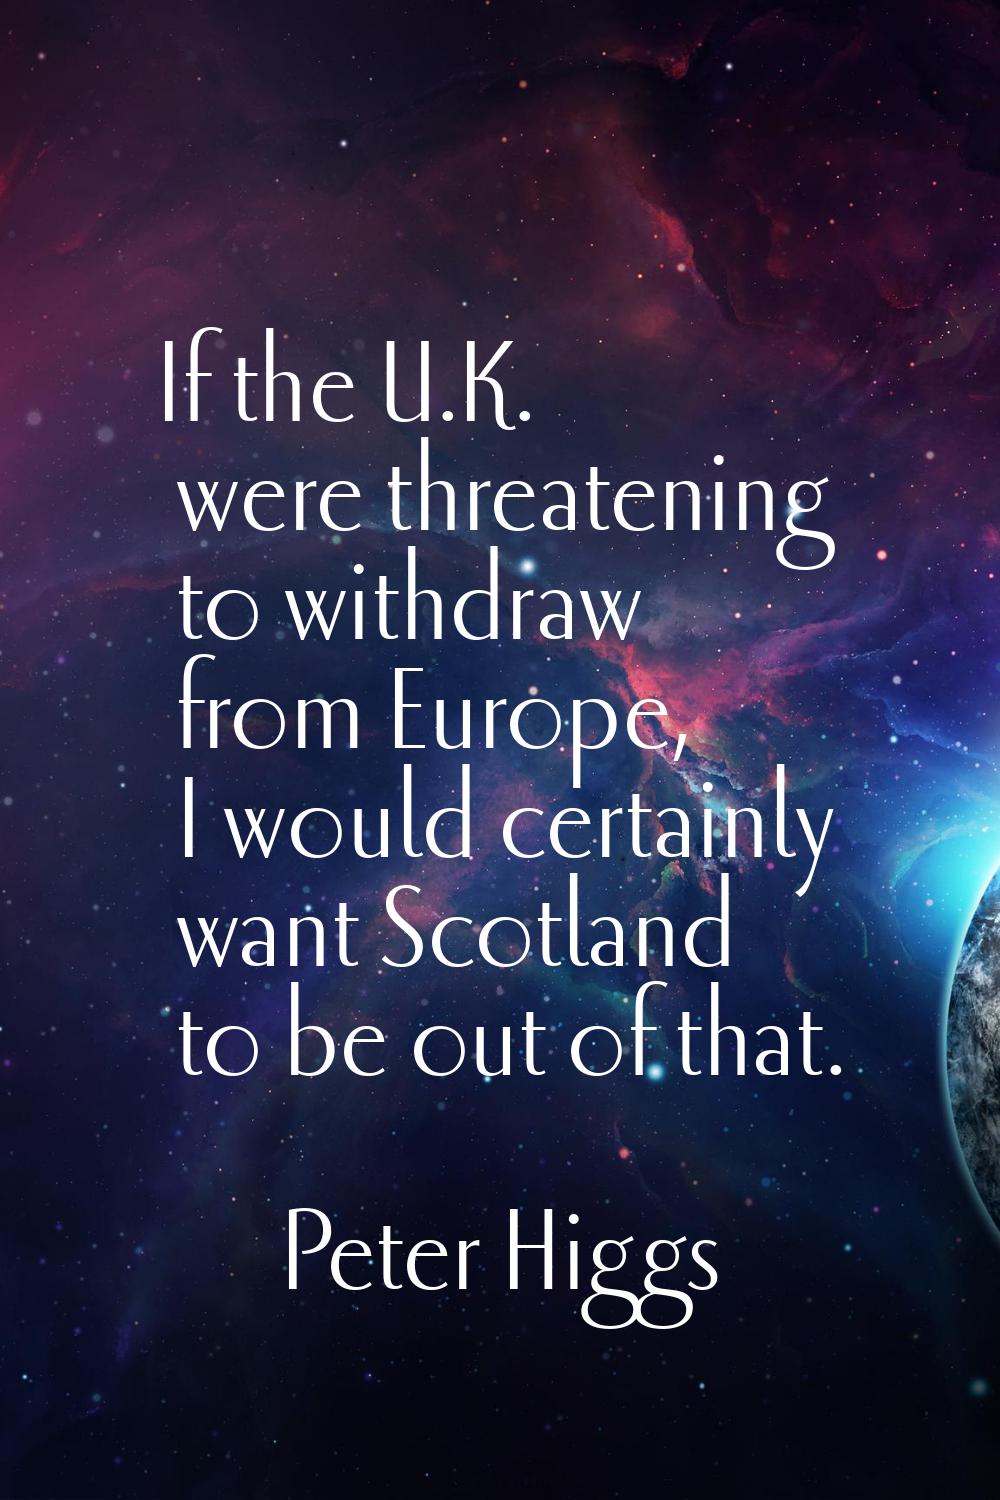 If the U.K. were threatening to withdraw from Europe, I would certainly want Scotland to be out of 